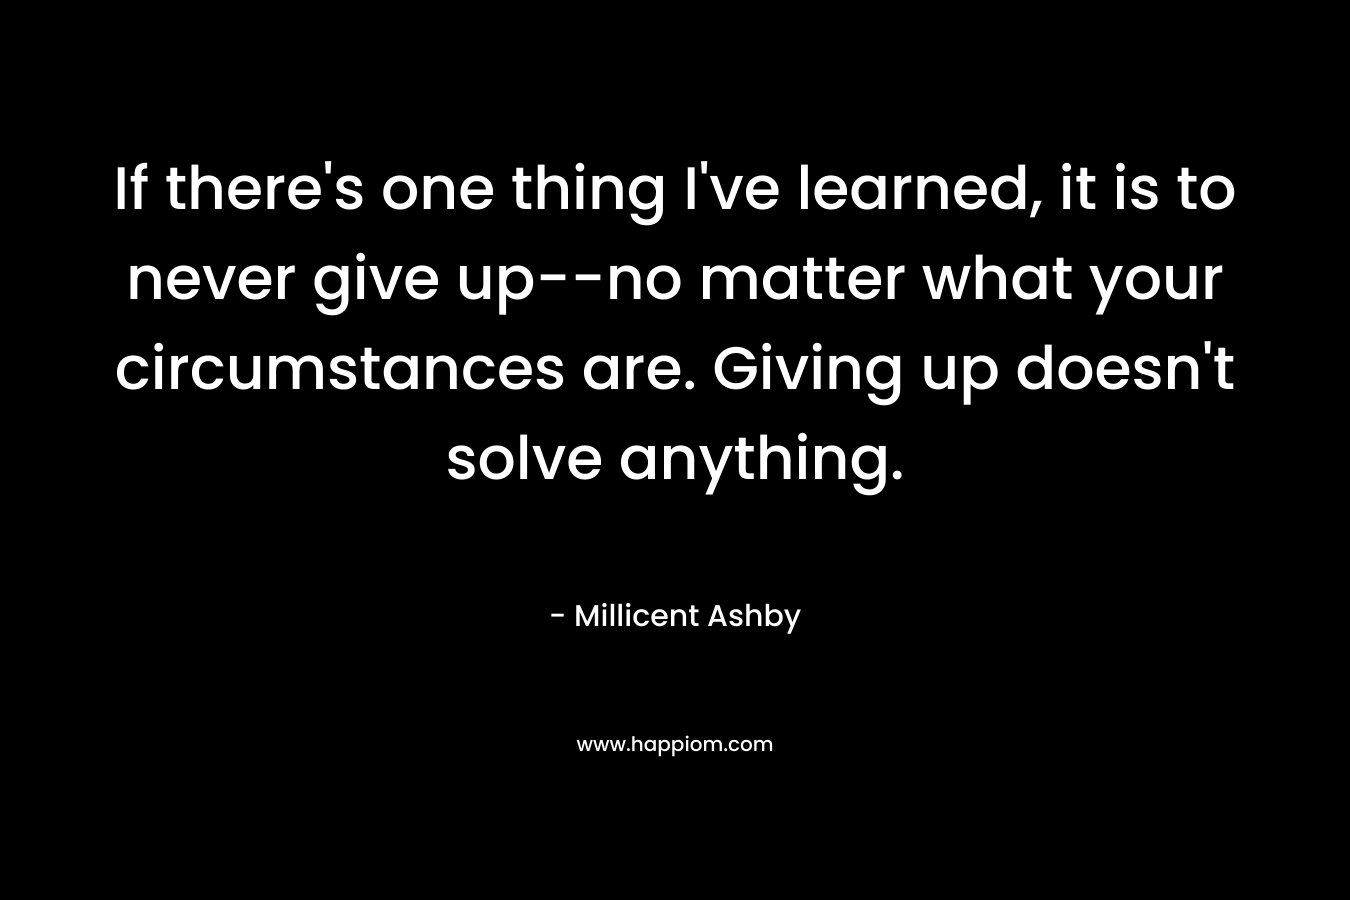 If there’s one thing I’ve learned, it is to never give up–no matter what your circumstances are. Giving up doesn’t solve anything. – Millicent Ashby